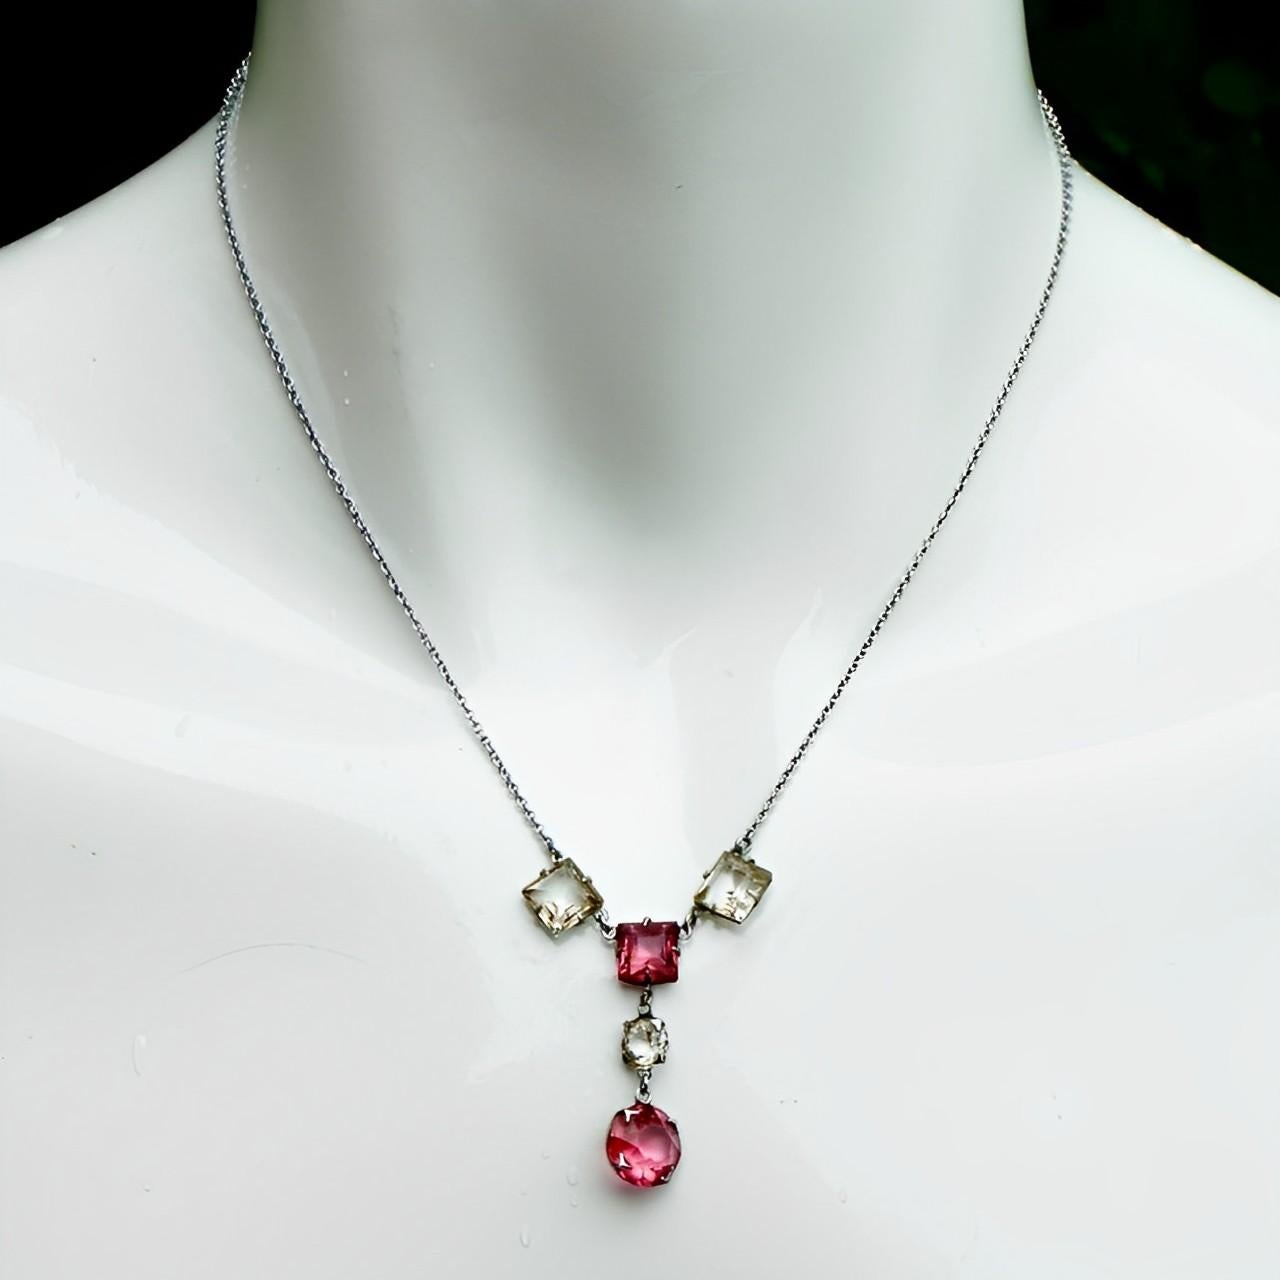 Art Deco silver tone chain necklace featuring a lovely drop pendant with square rouge pink and clear glass crystals in open back settings. The faceted crystals are raised at the front and pointed at the back, for maximum sparkle. The chain links are